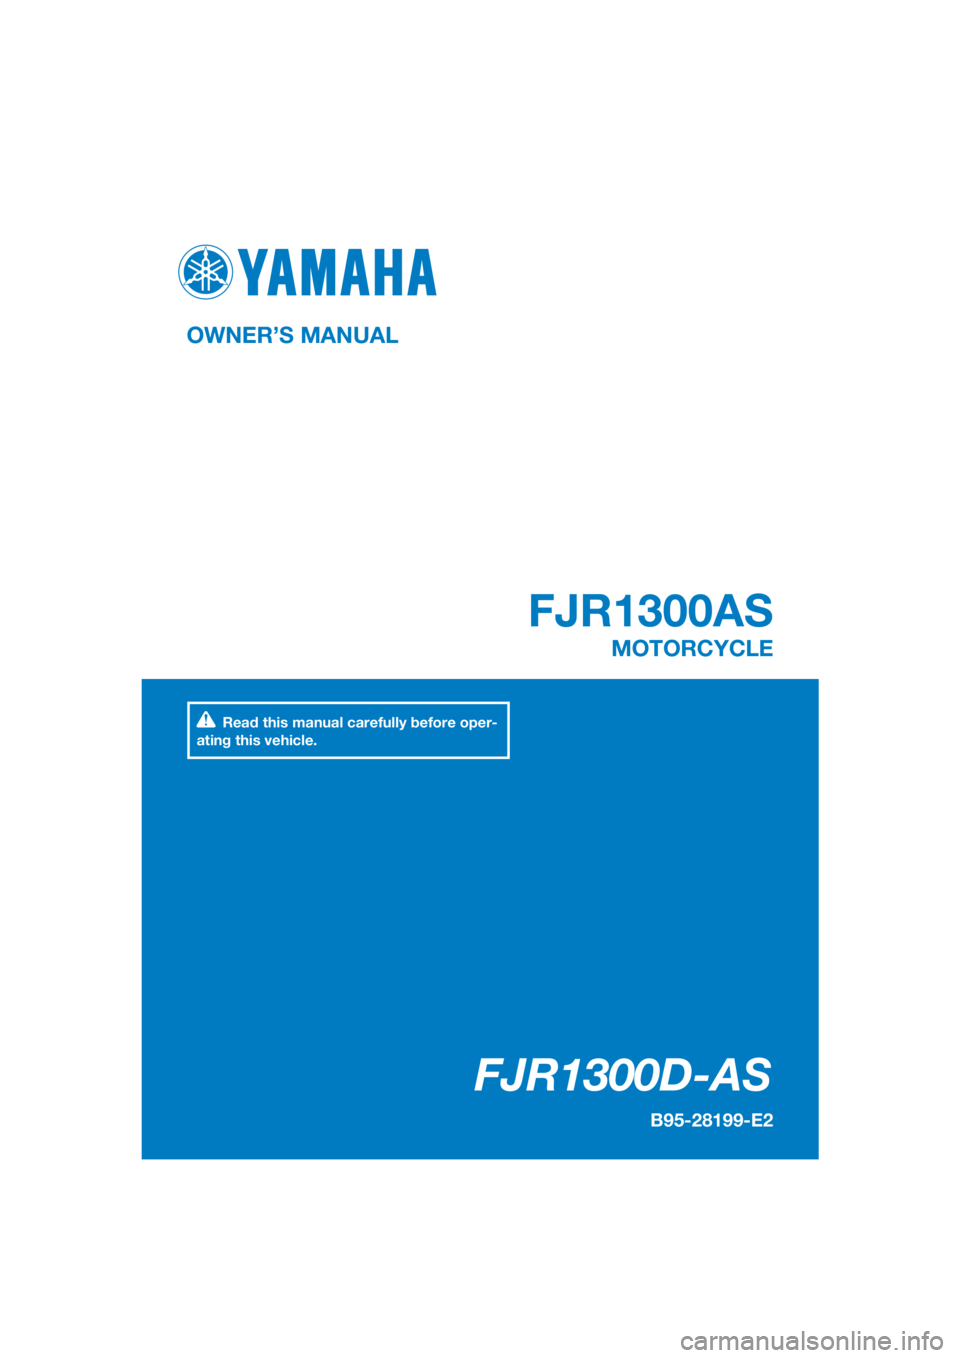 YAMAHA FJR1300AS 2020  Owners Manual DIC183
FJR1300D-AS
FJR1300AS
OWNER’S MANUAL
B95-28199-E2
MOTORCYCLE
[English  (E)]
Read this manual carefully before oper-
ating this vehicle. 